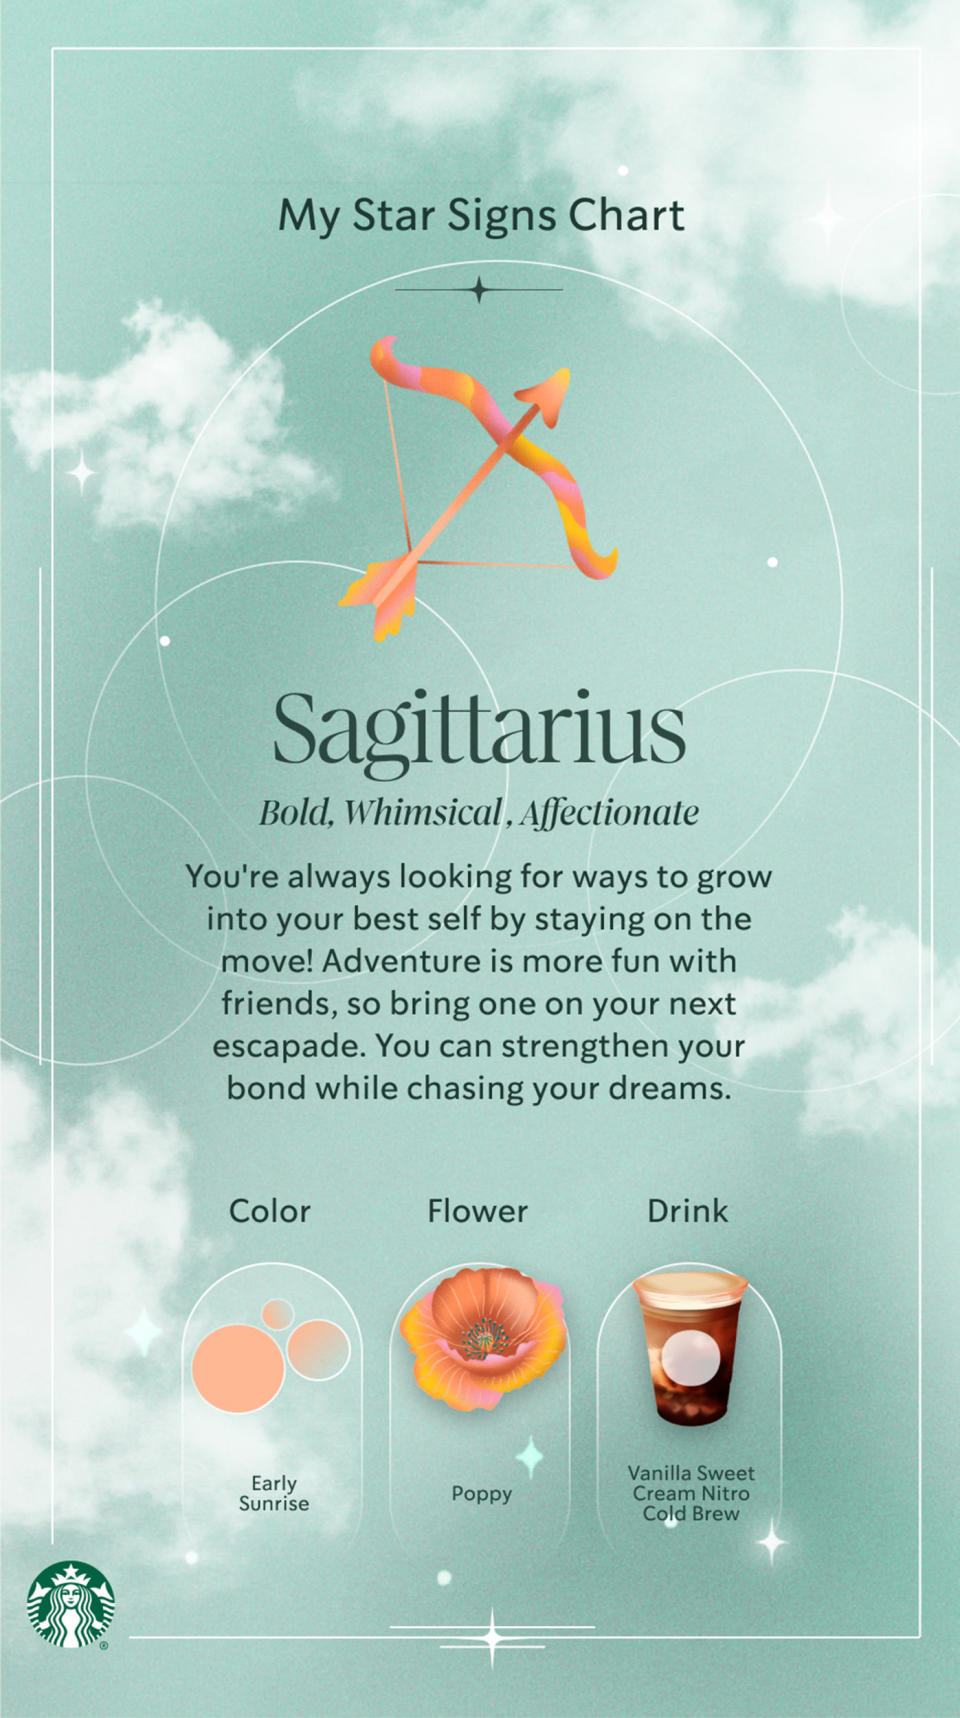 The results of a Sagittarius reading on Sanctuary Star Signs. (Starbucks)